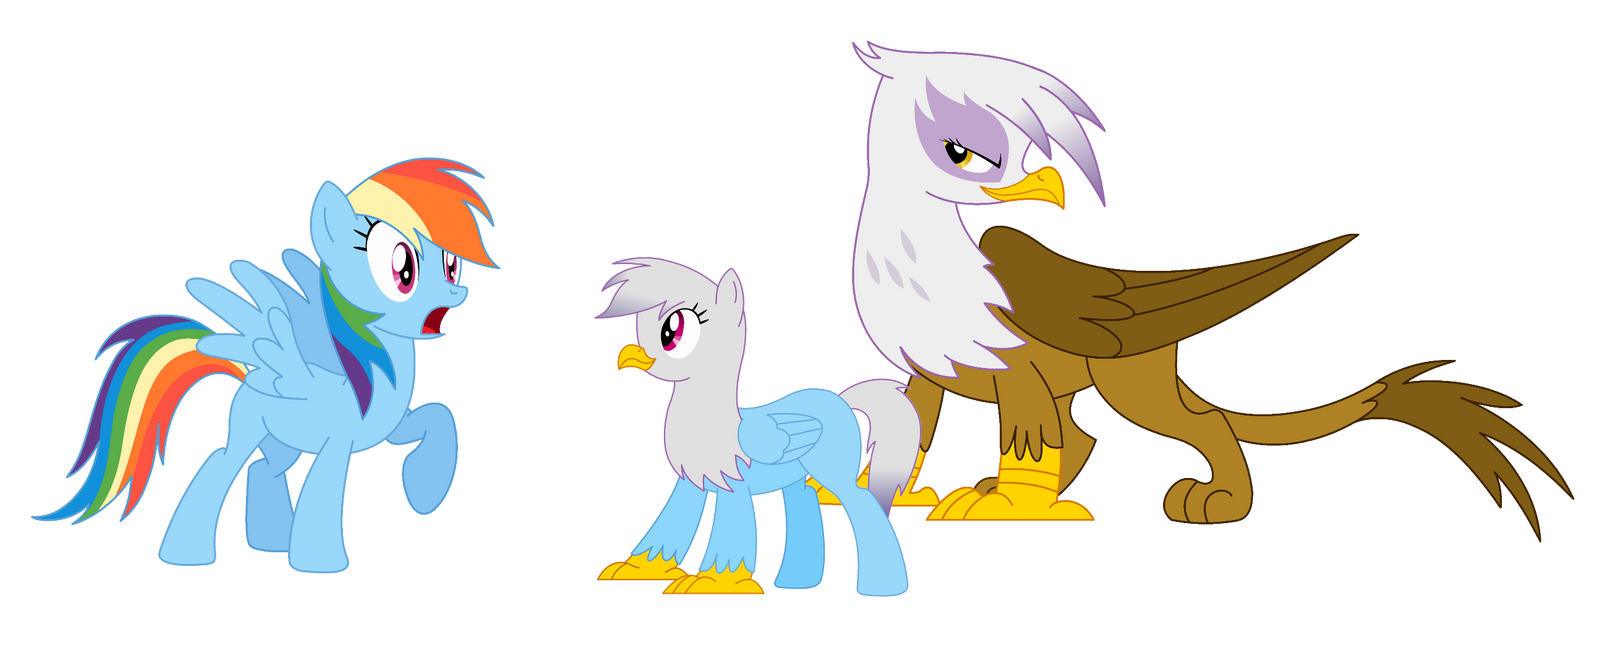 dash__s_pride_by_cloudwatcherpony-d4b09h8.png